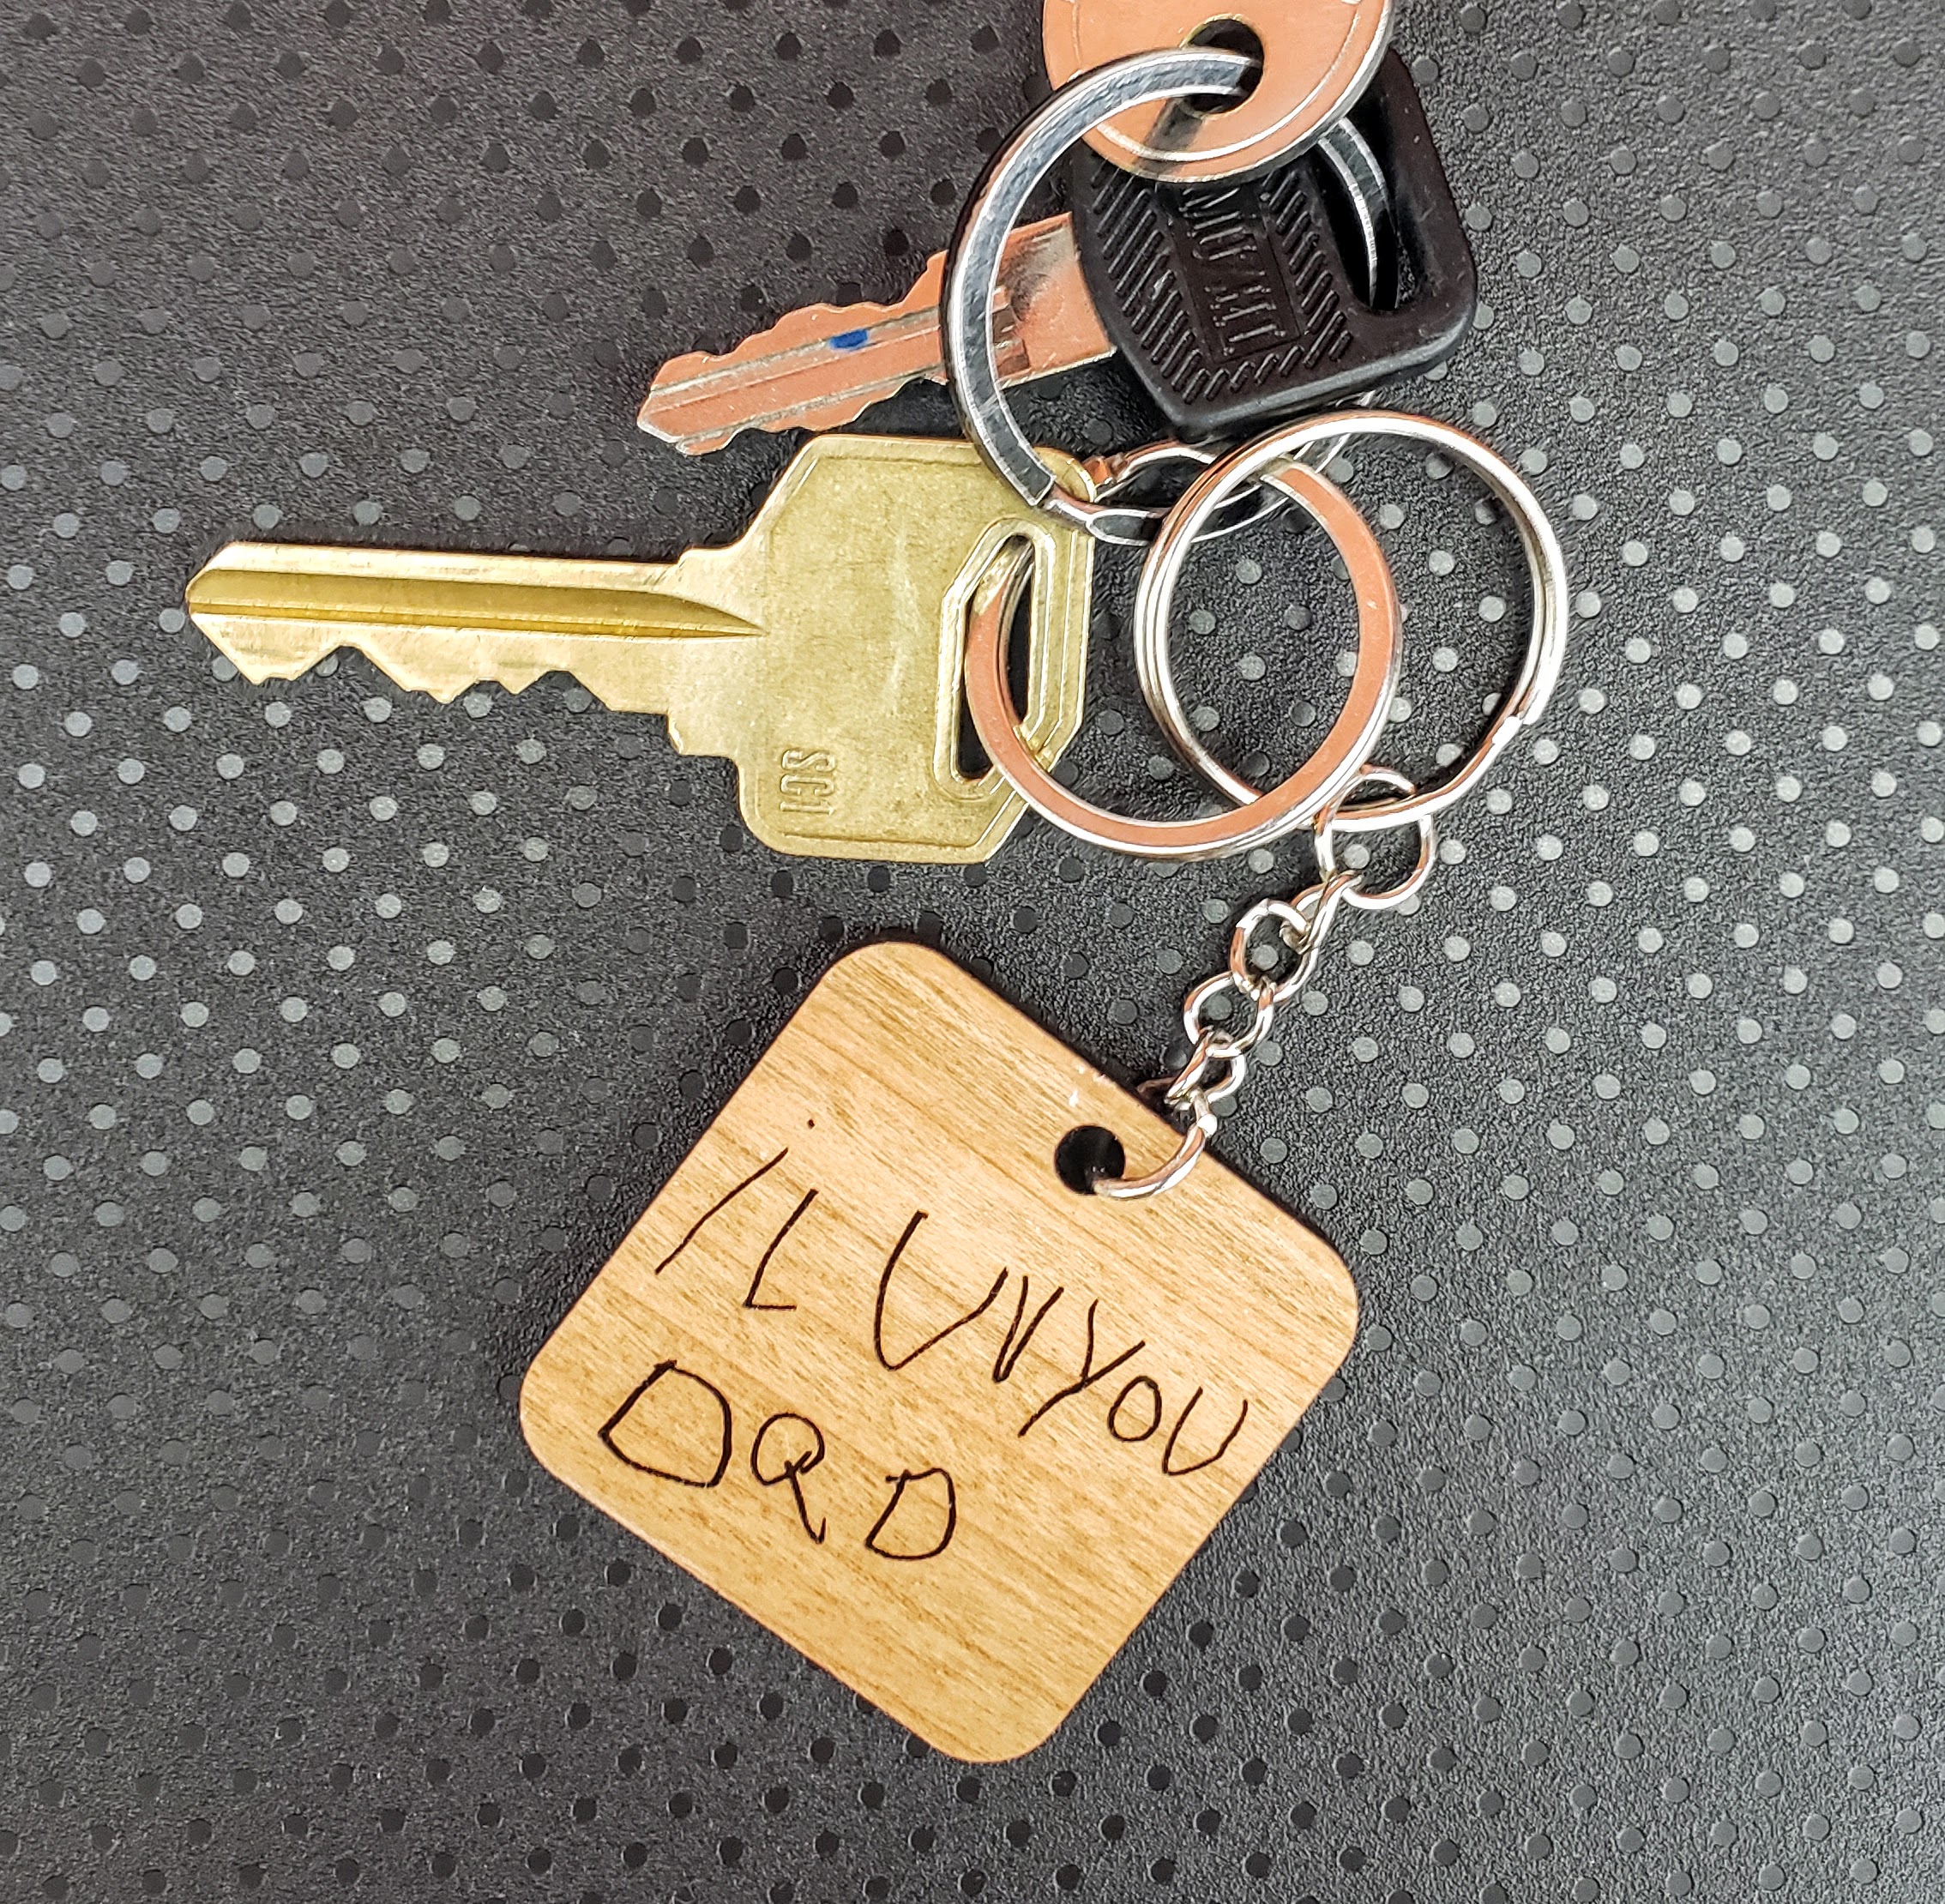 I love you dad is engraved on a keychain